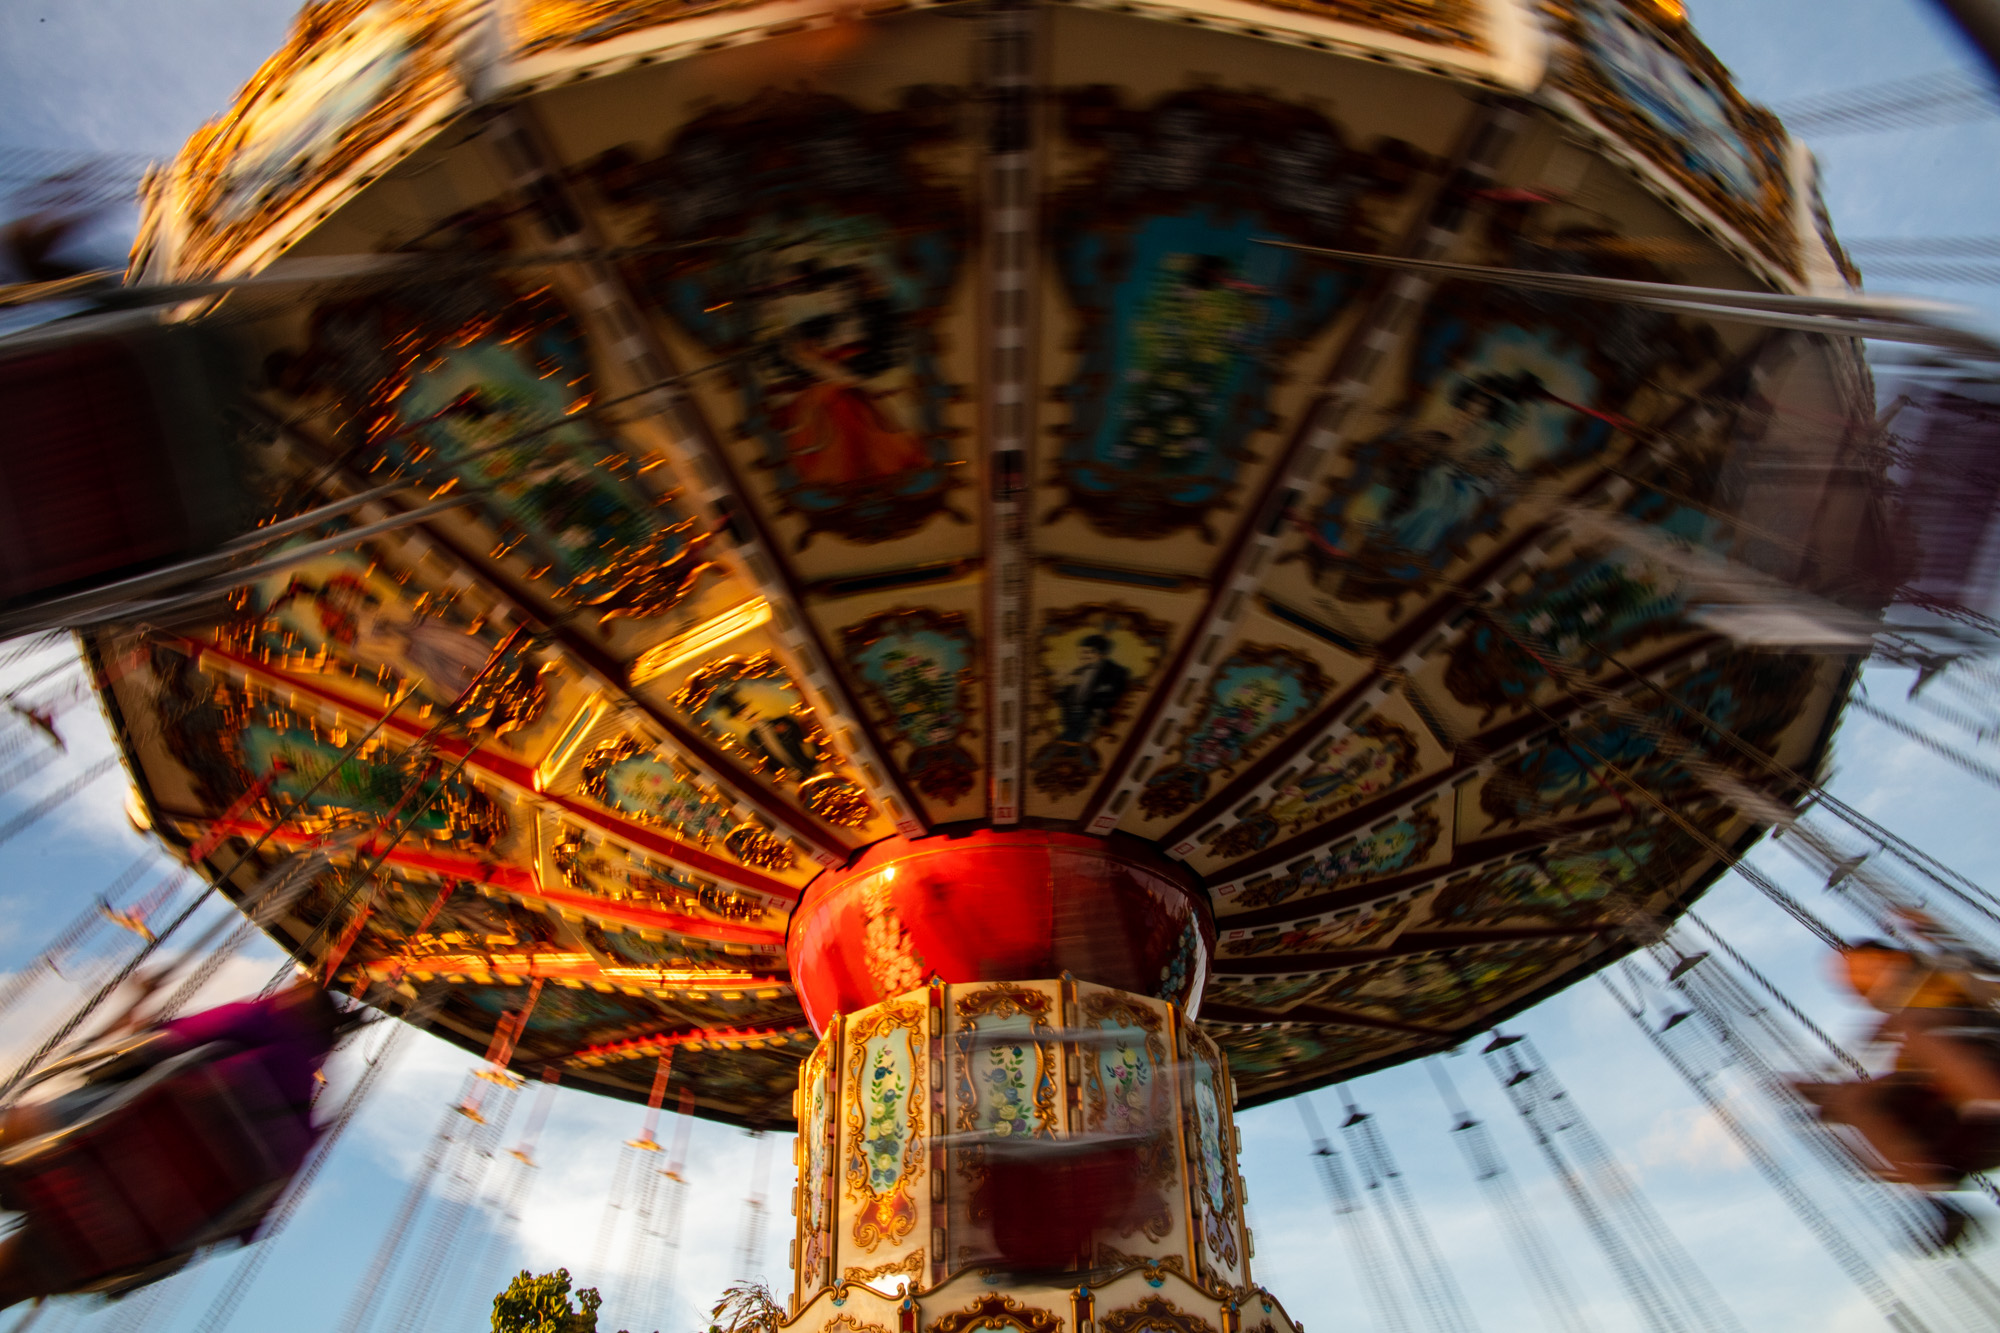 The spin of the chairoplane I